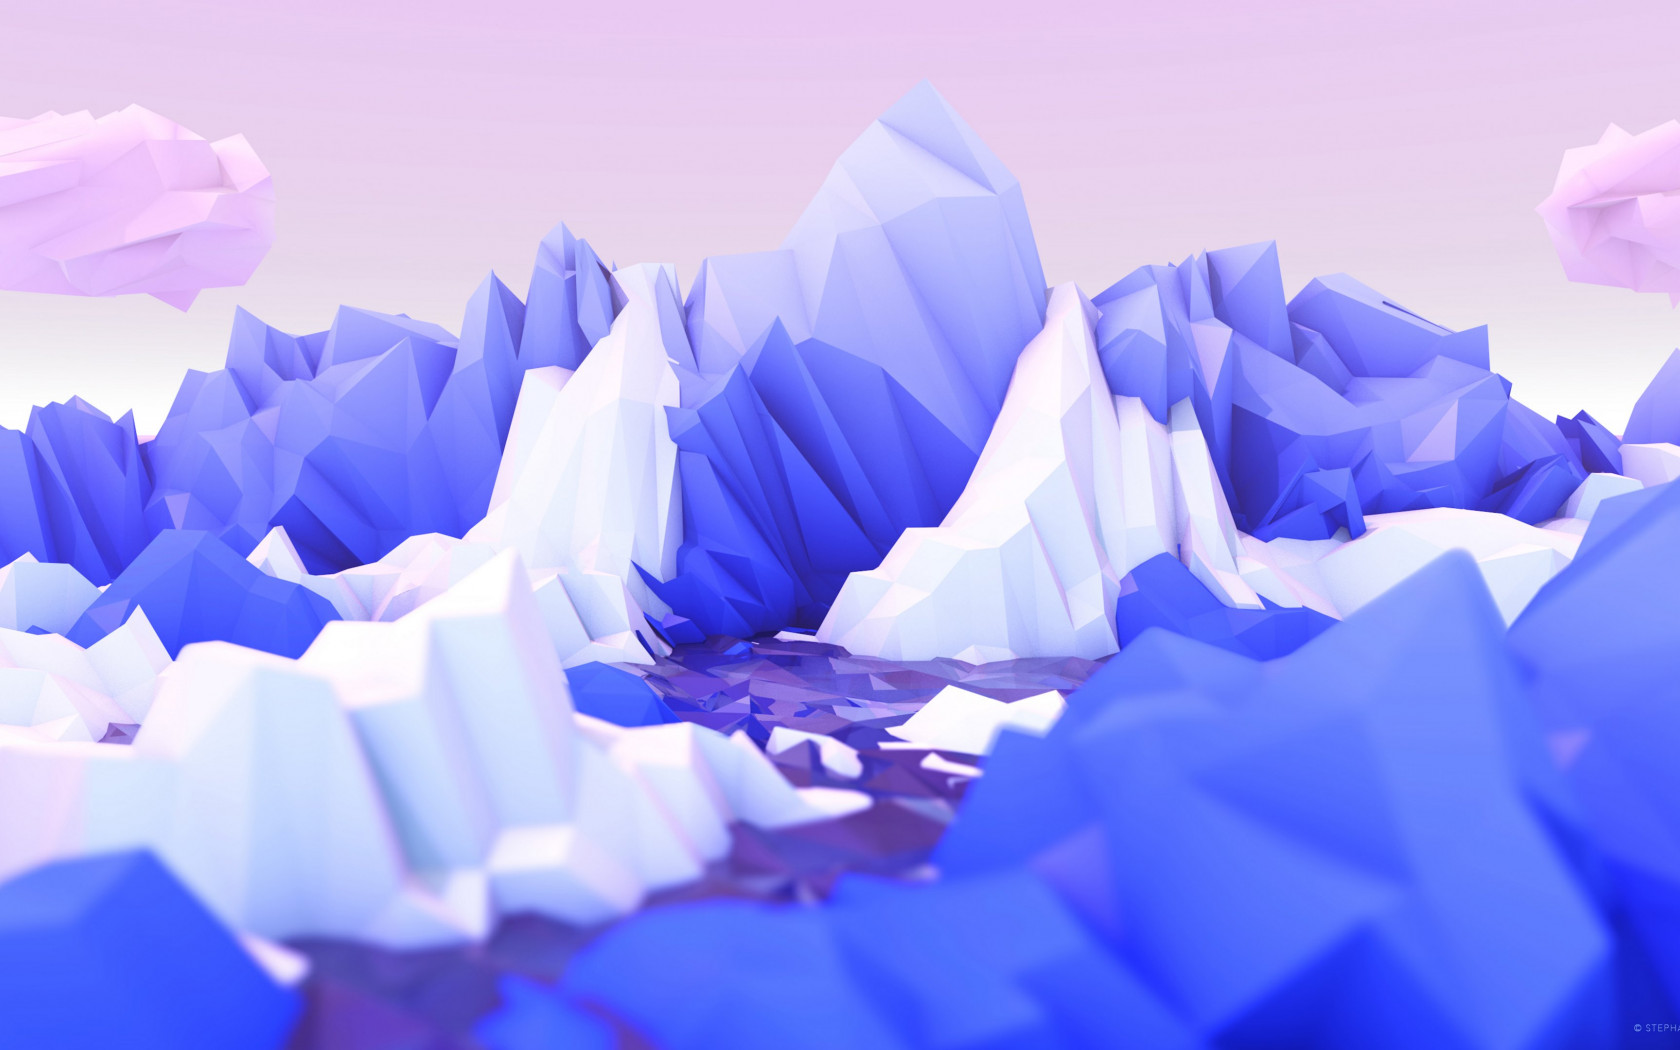 Low poly graphic design wallpaper 1680x1050